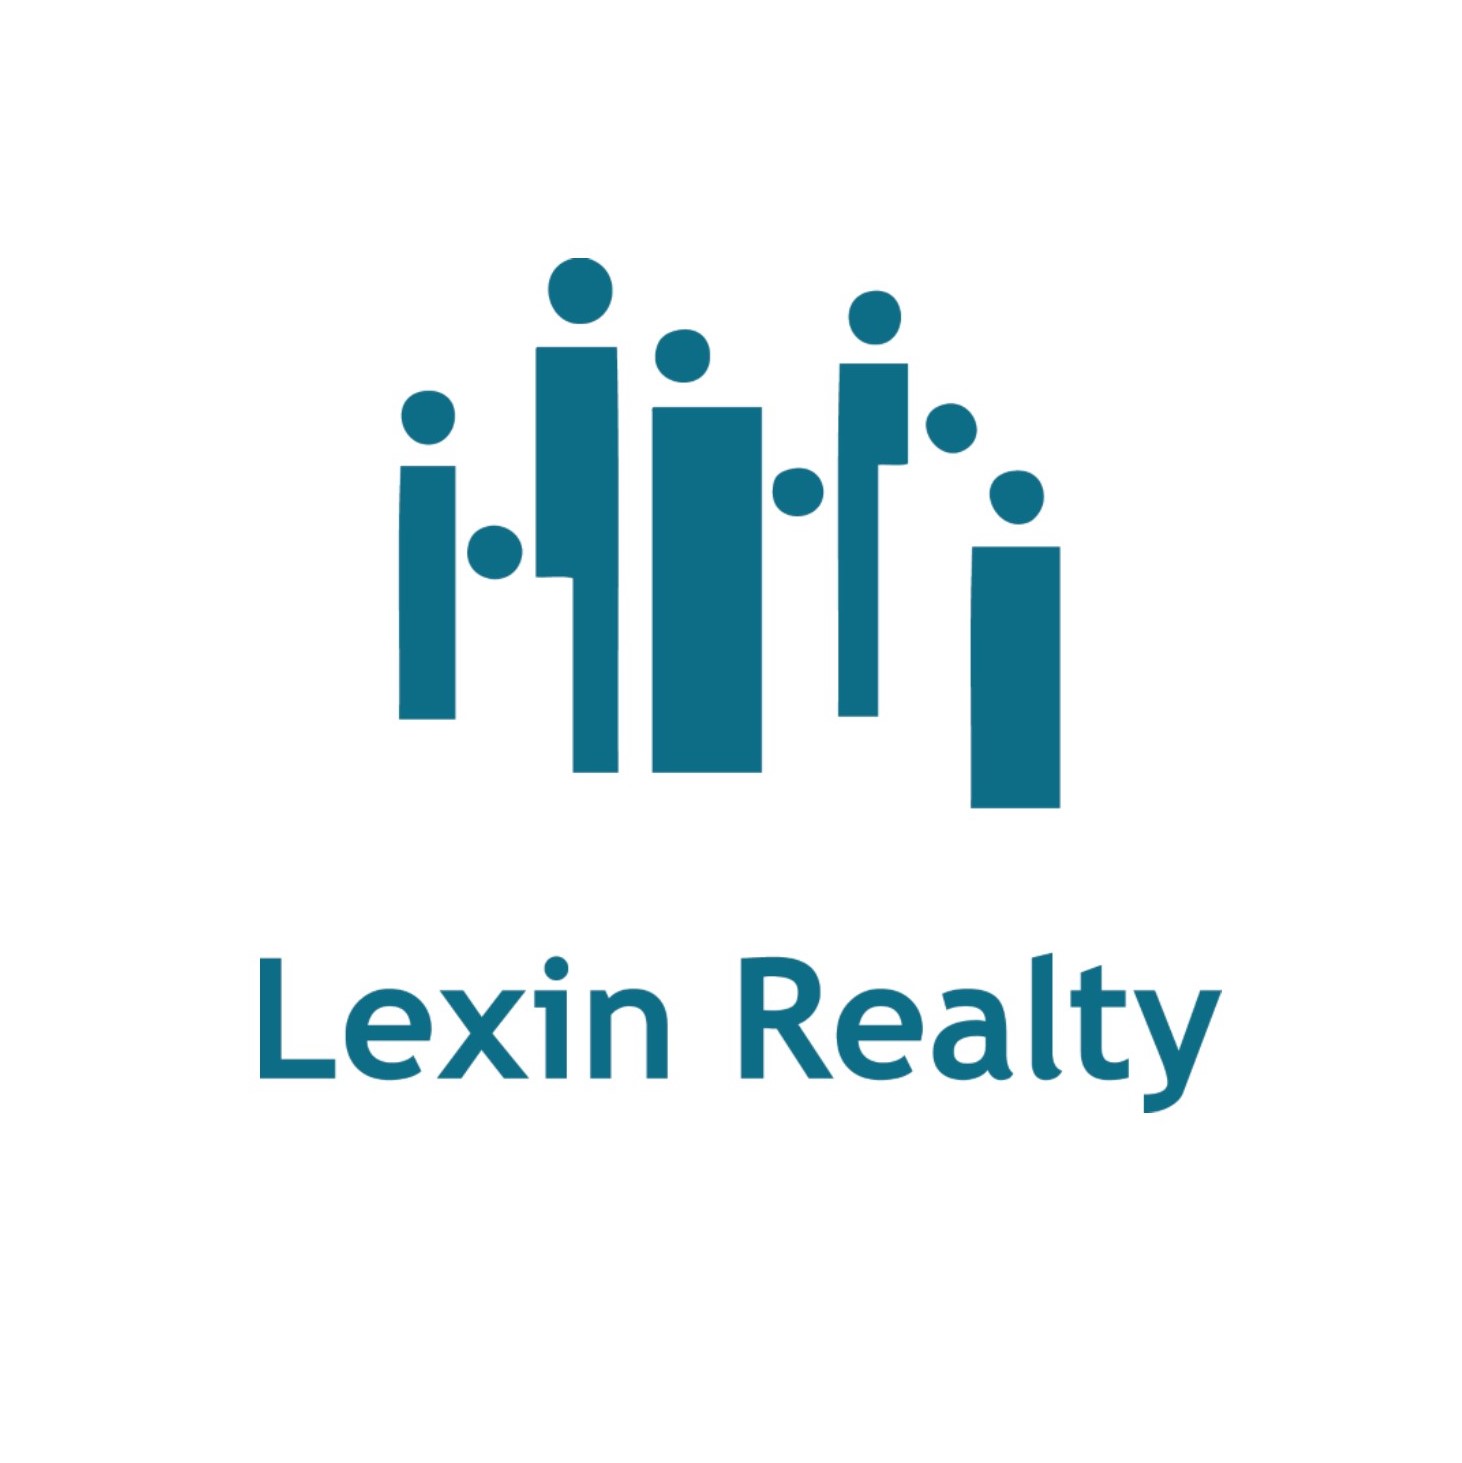 Lexin Realty